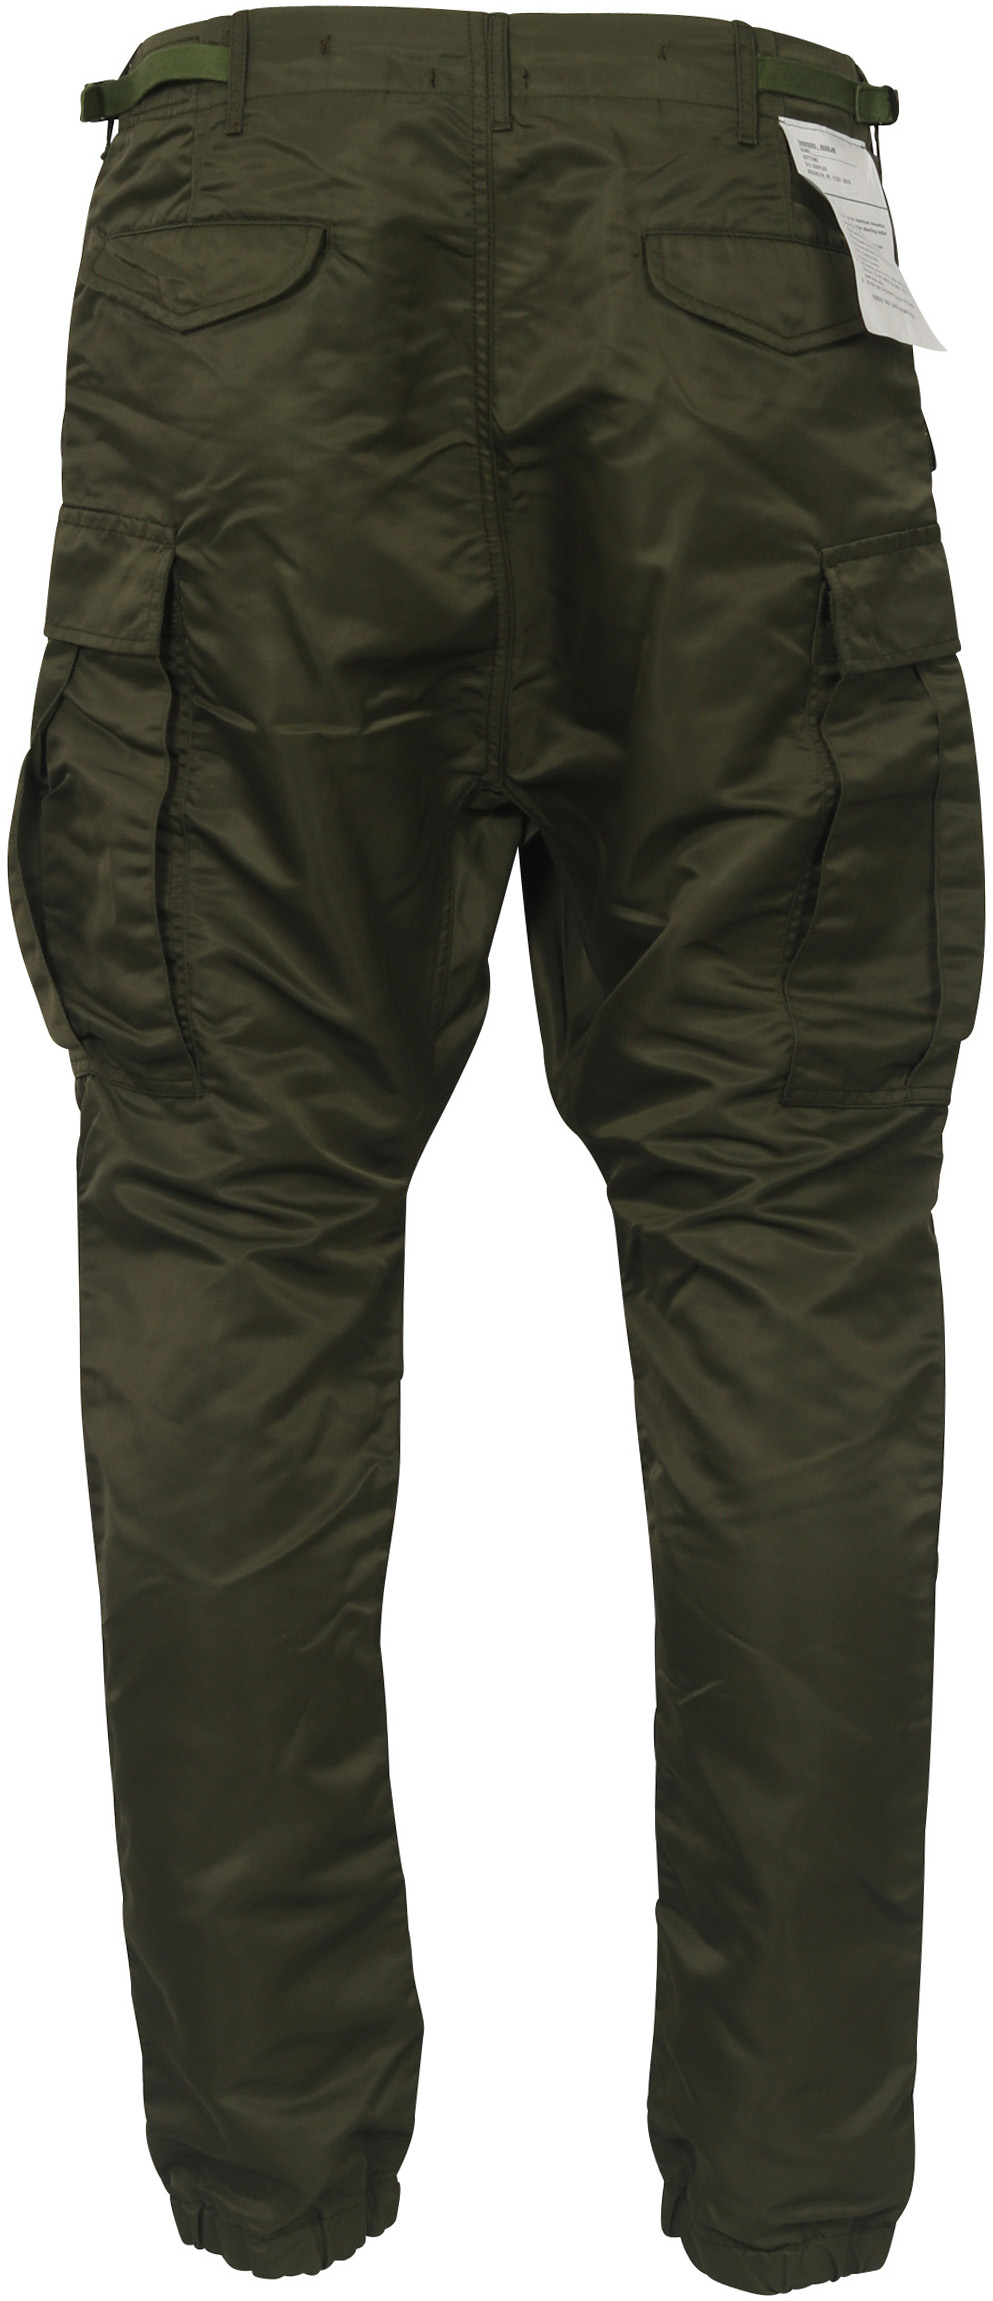 R13 Military Cargo Pant Olive